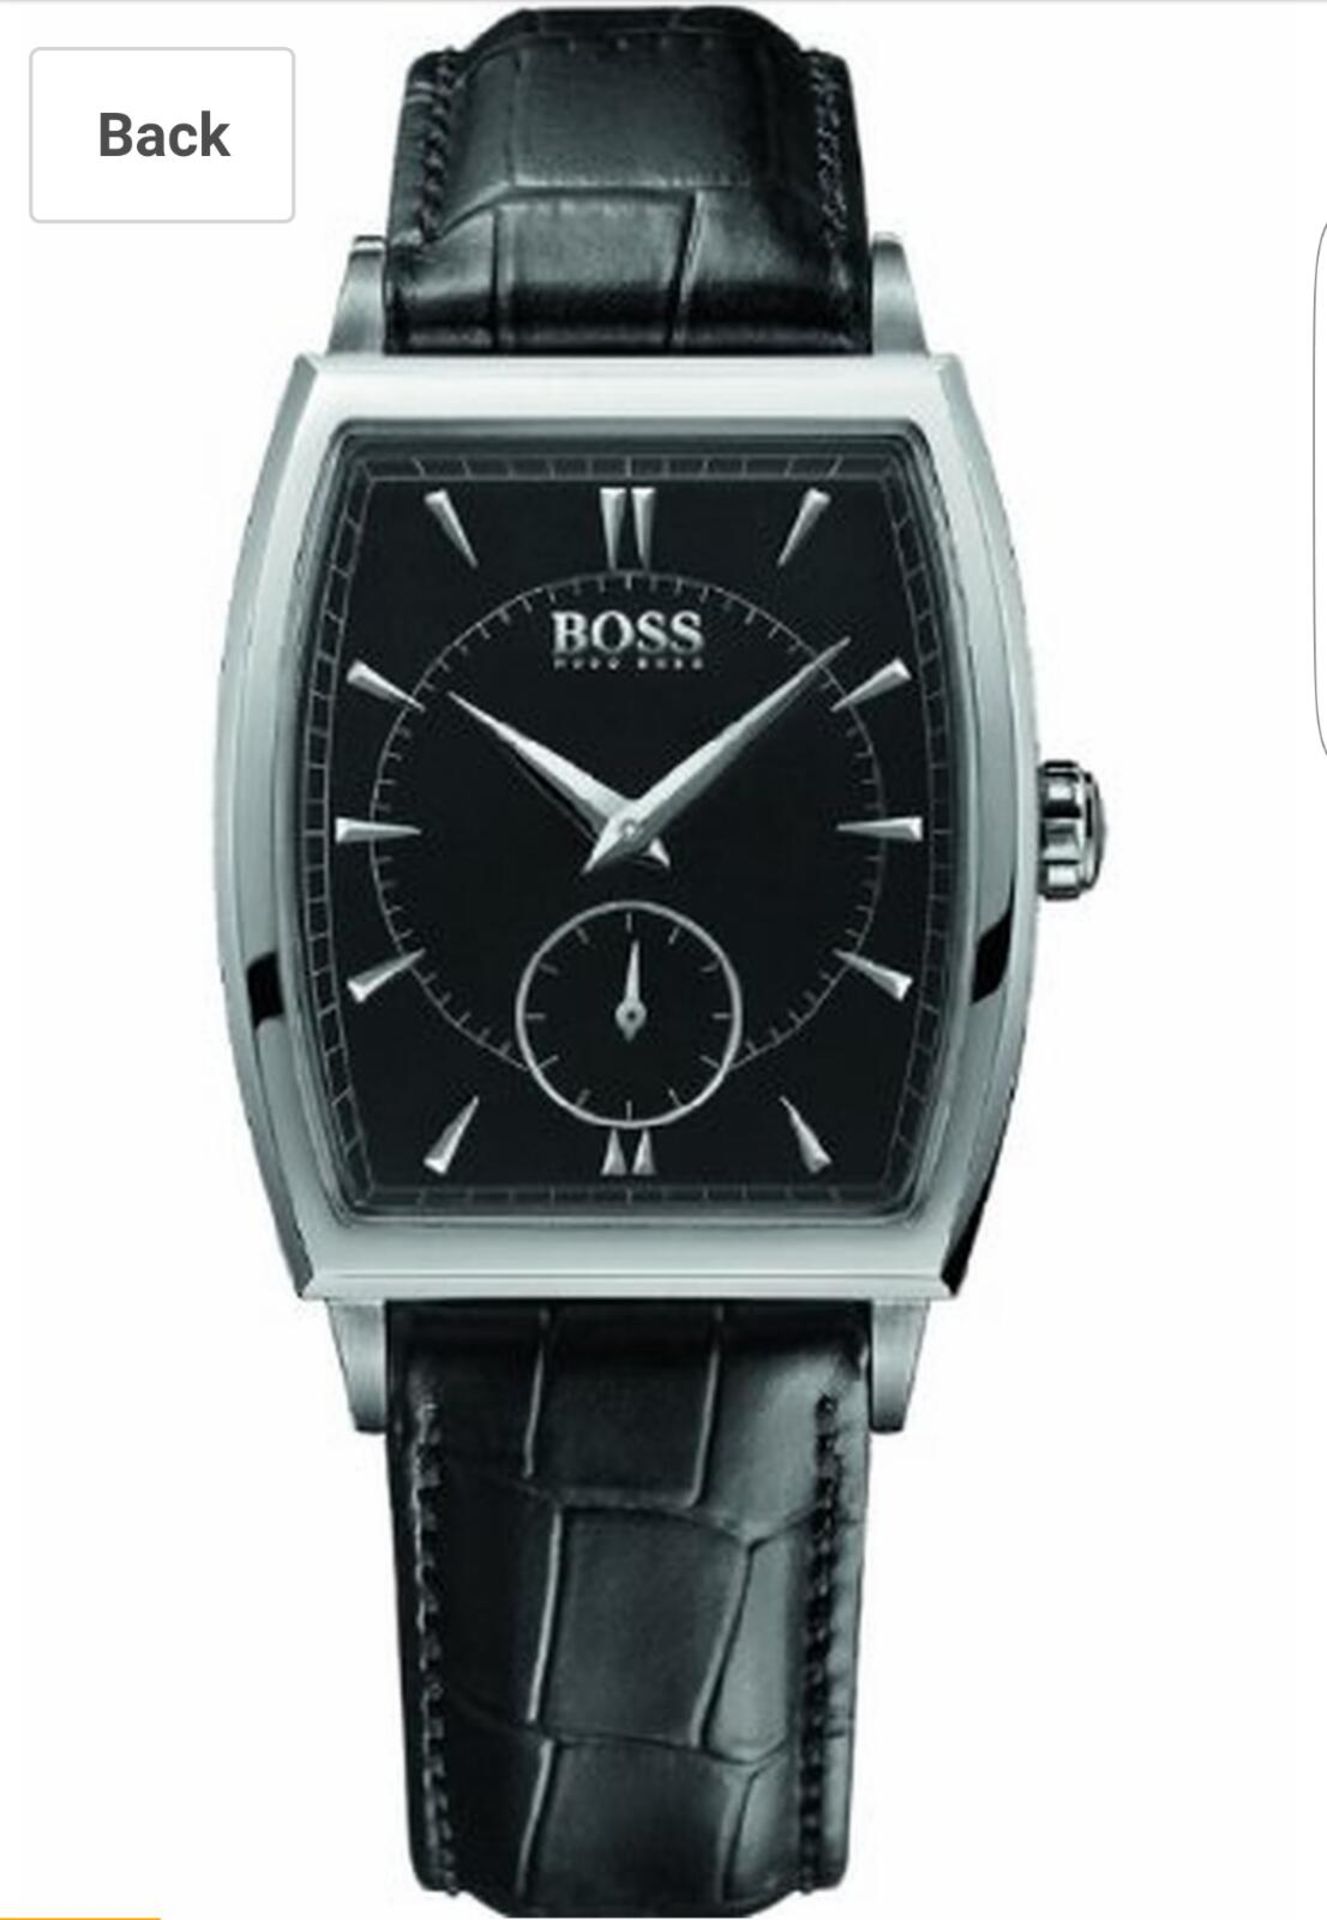 BRAND NEW GENTS HUGO BOSS 1512845, DESIGNER WATCH WITH A LEATHER STRAP AND ORIGINAL BOX - RRP £499